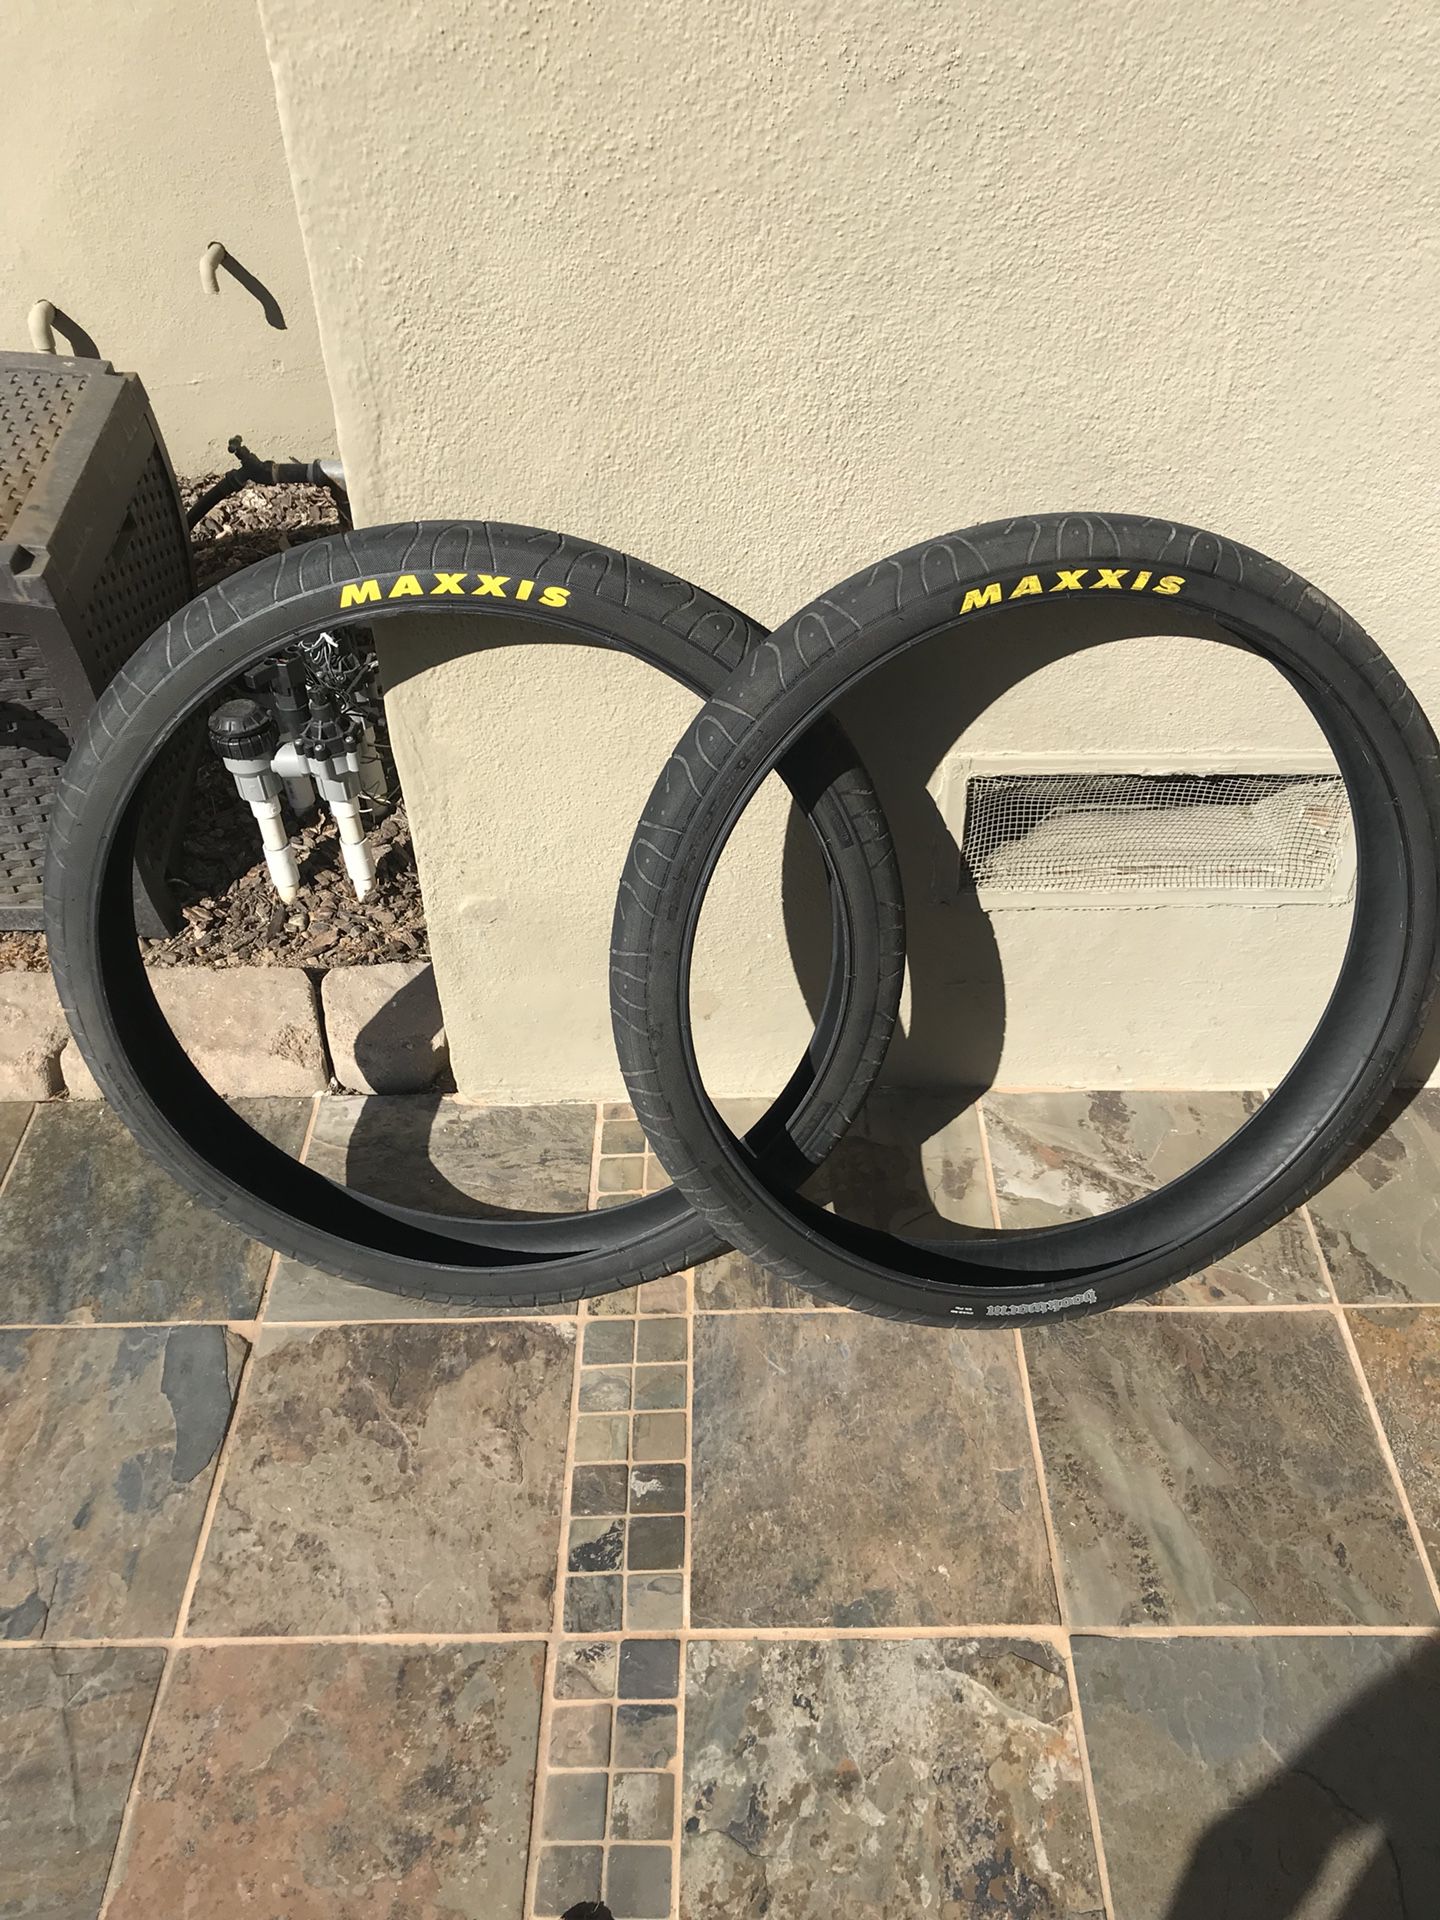 Maxxis Hookworm 29 inch tires for Sale in San Jose, CA - OfferUp